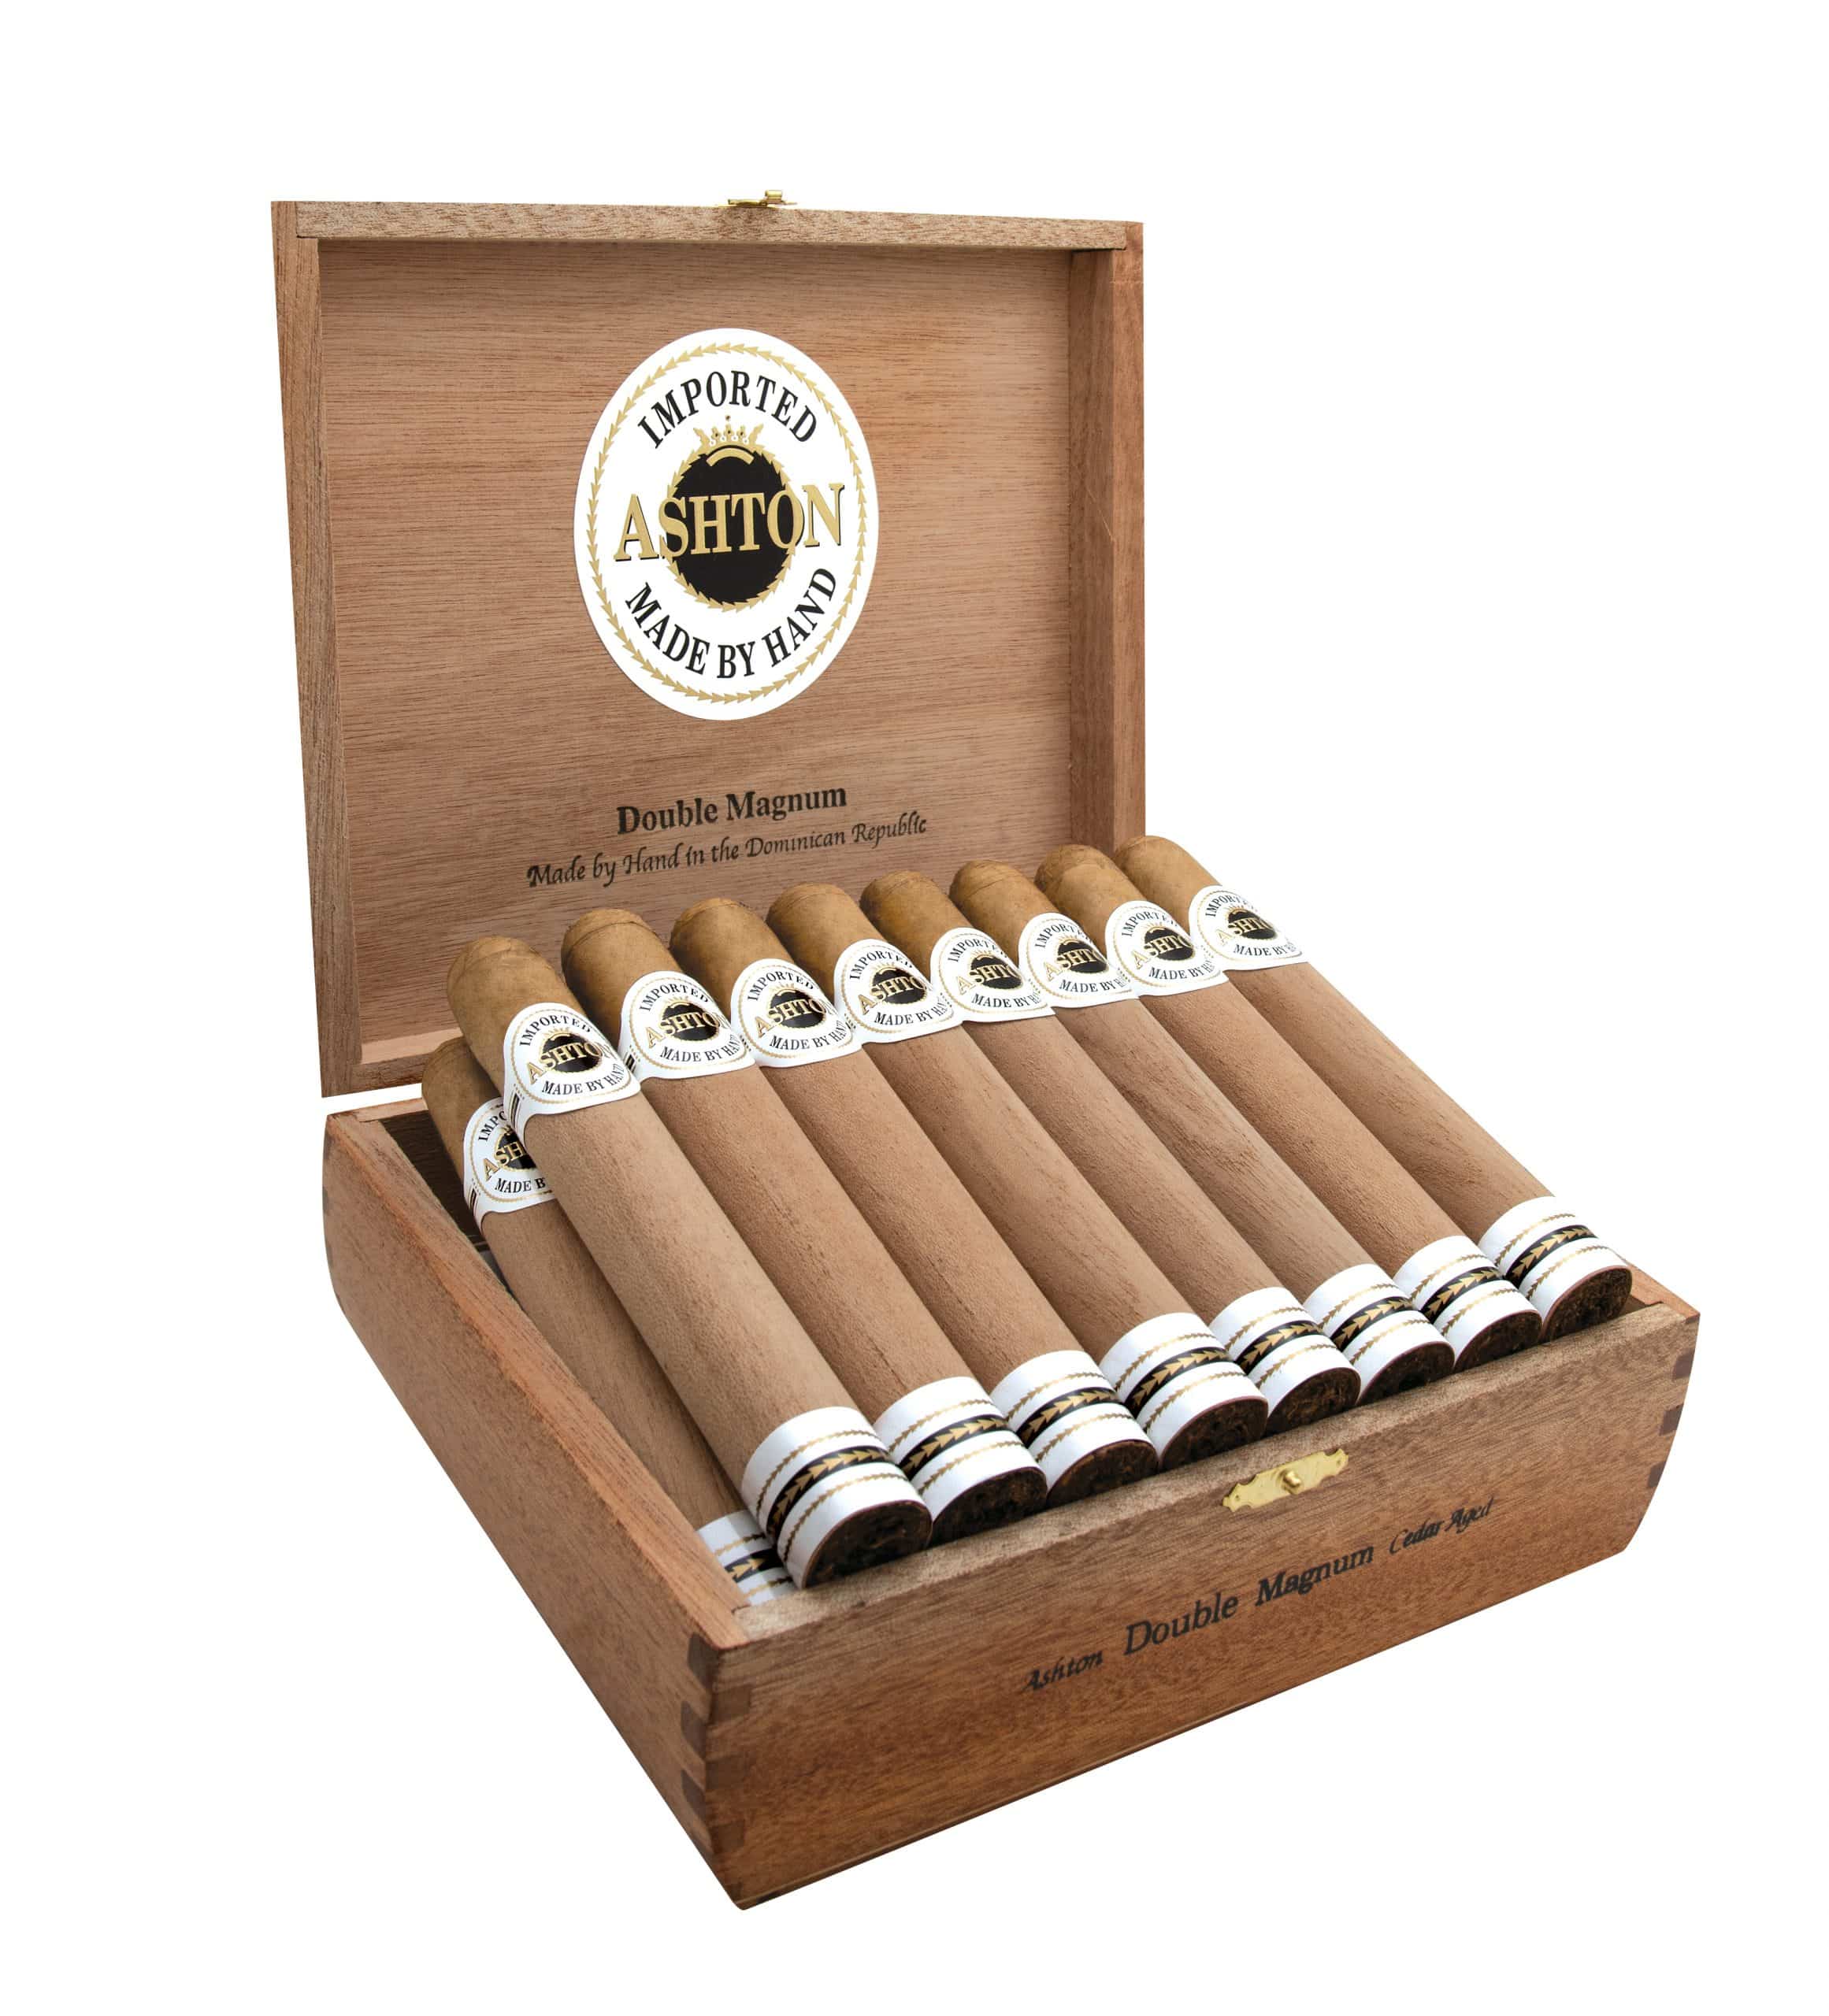 box of 25 count Ashton Double Magnum cigars